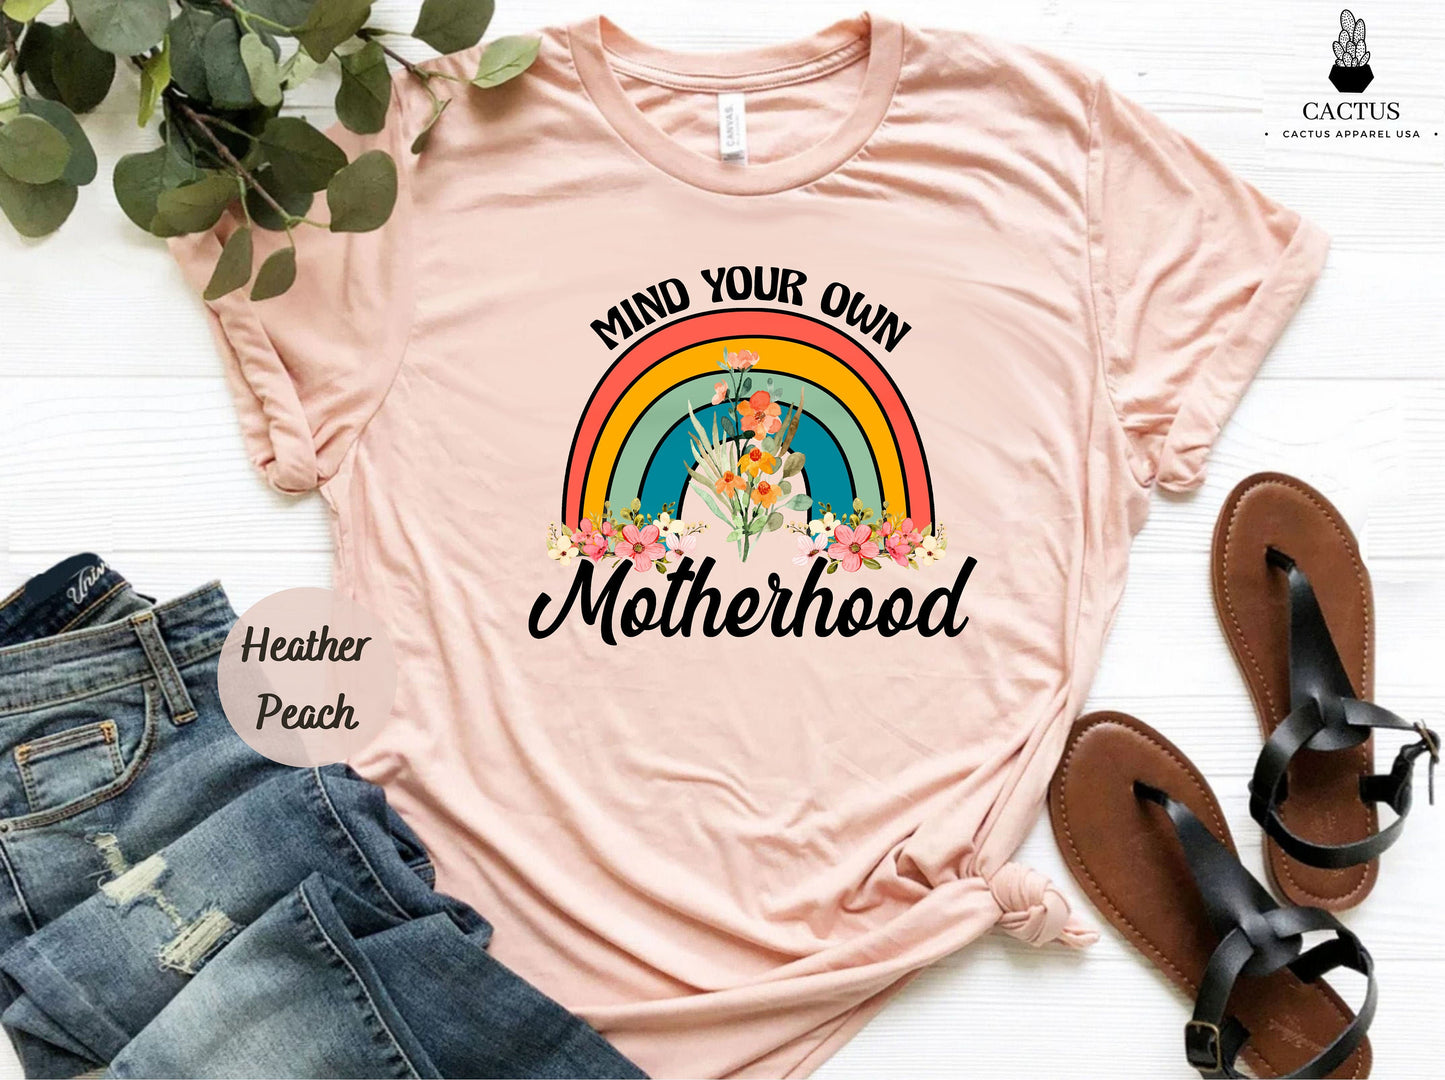 Mind Your Own Motherhood Shirt, Mother's Day Mom Life Shirt Mother's Day gift, Mama Tee, Motherhood, Mind Your Own, Breastfeeding Motherhood